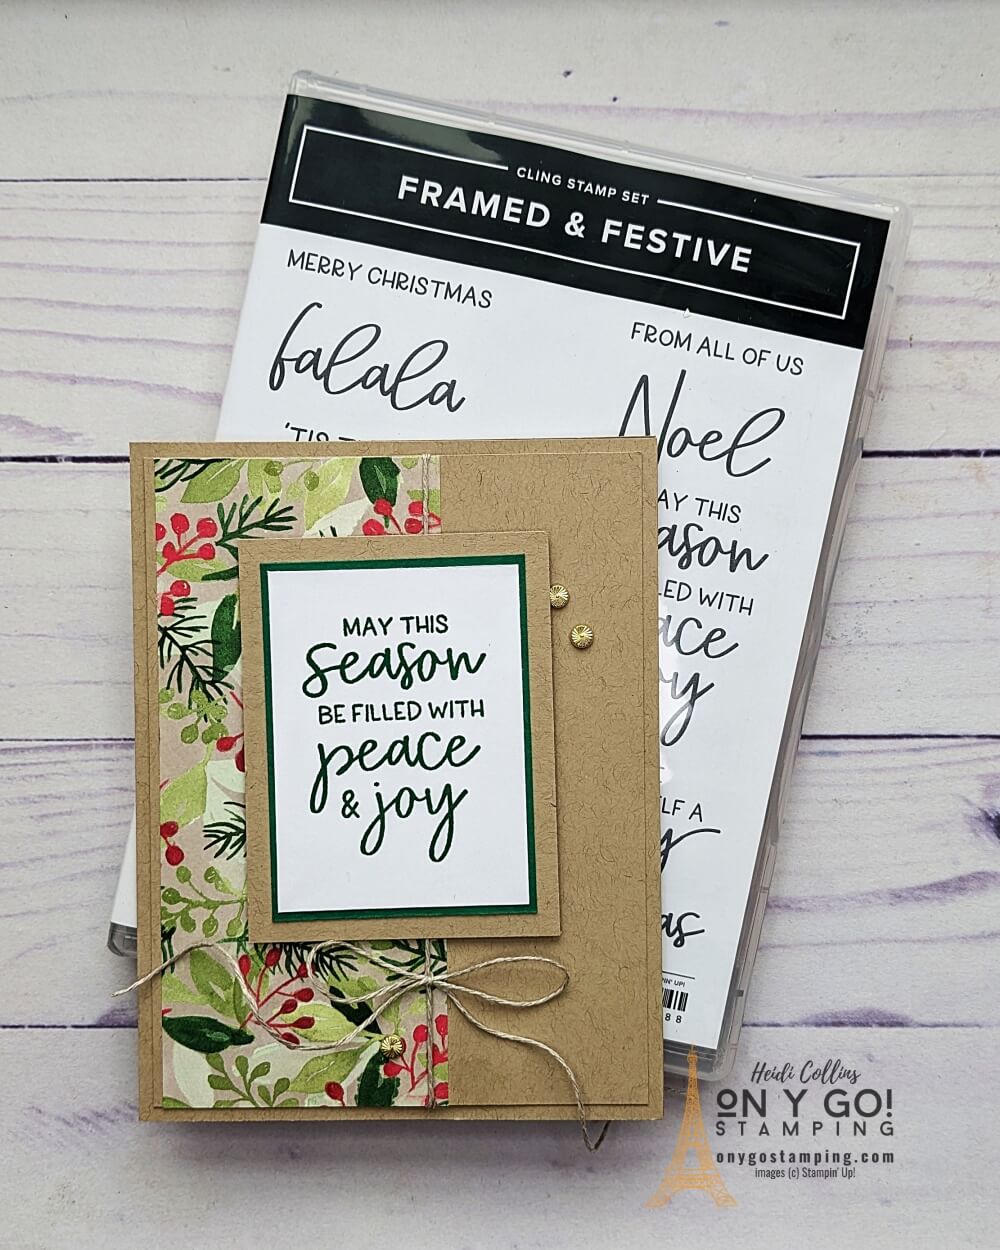 The Framed & Festive stamp set from Stampin' Up!® is perfect for creating quick and easy Christmas cards with patterned paper like the Painted Christmas Designer Series Paper.